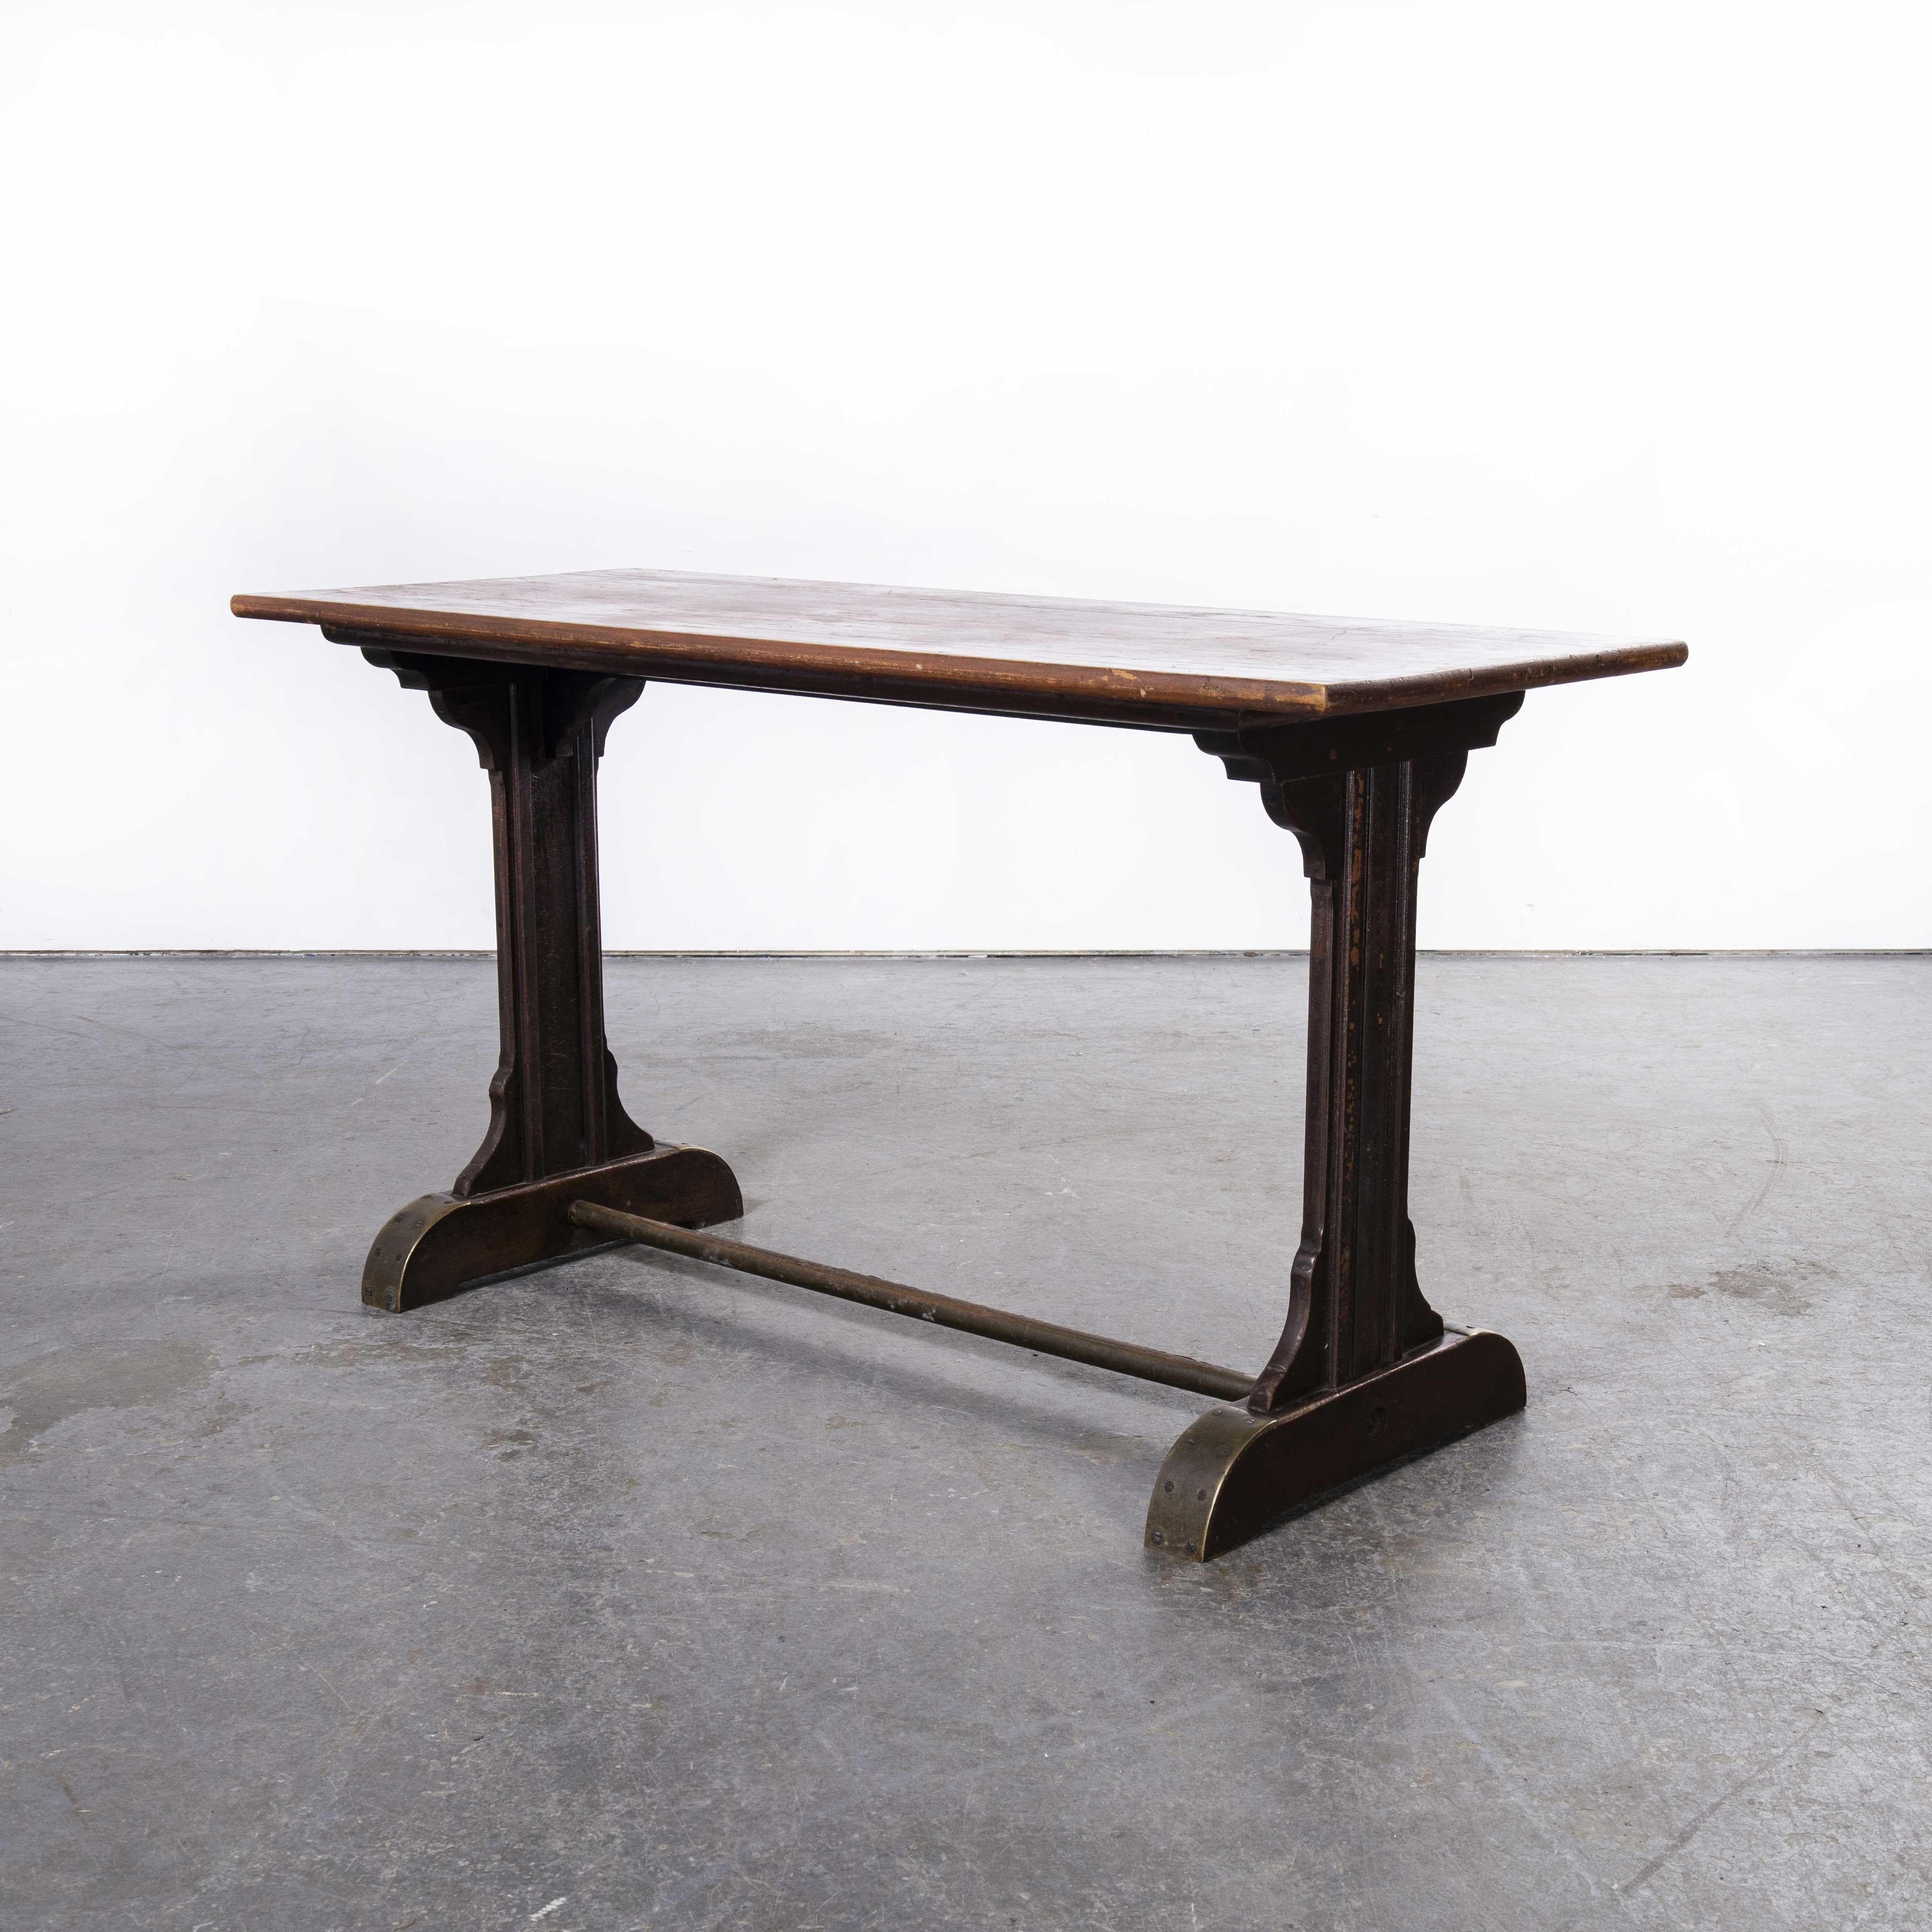 1930’s Original French Caf? Table – Rectangular dining table (model 1114.3)

1930’s Original French Caf? Table – Rectangular dining table. Instantly familiar, this is a classic French Caf? table that has survived since the 30’s. Made in solid oak